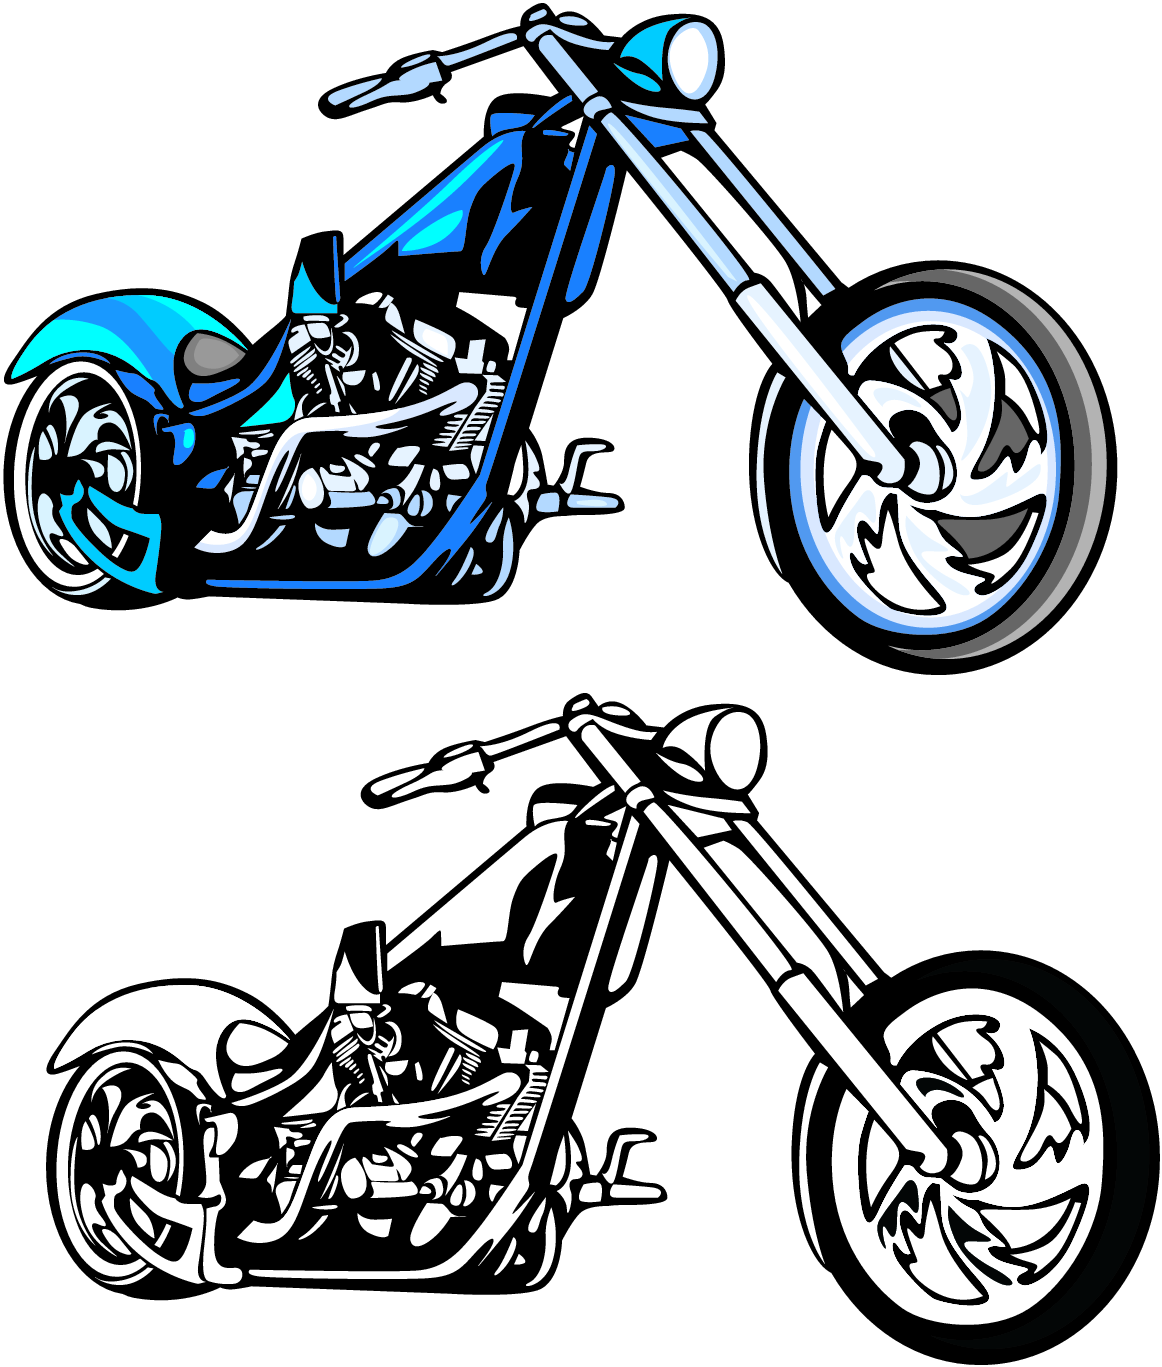 Harley davidson clipart motorcycle clipart